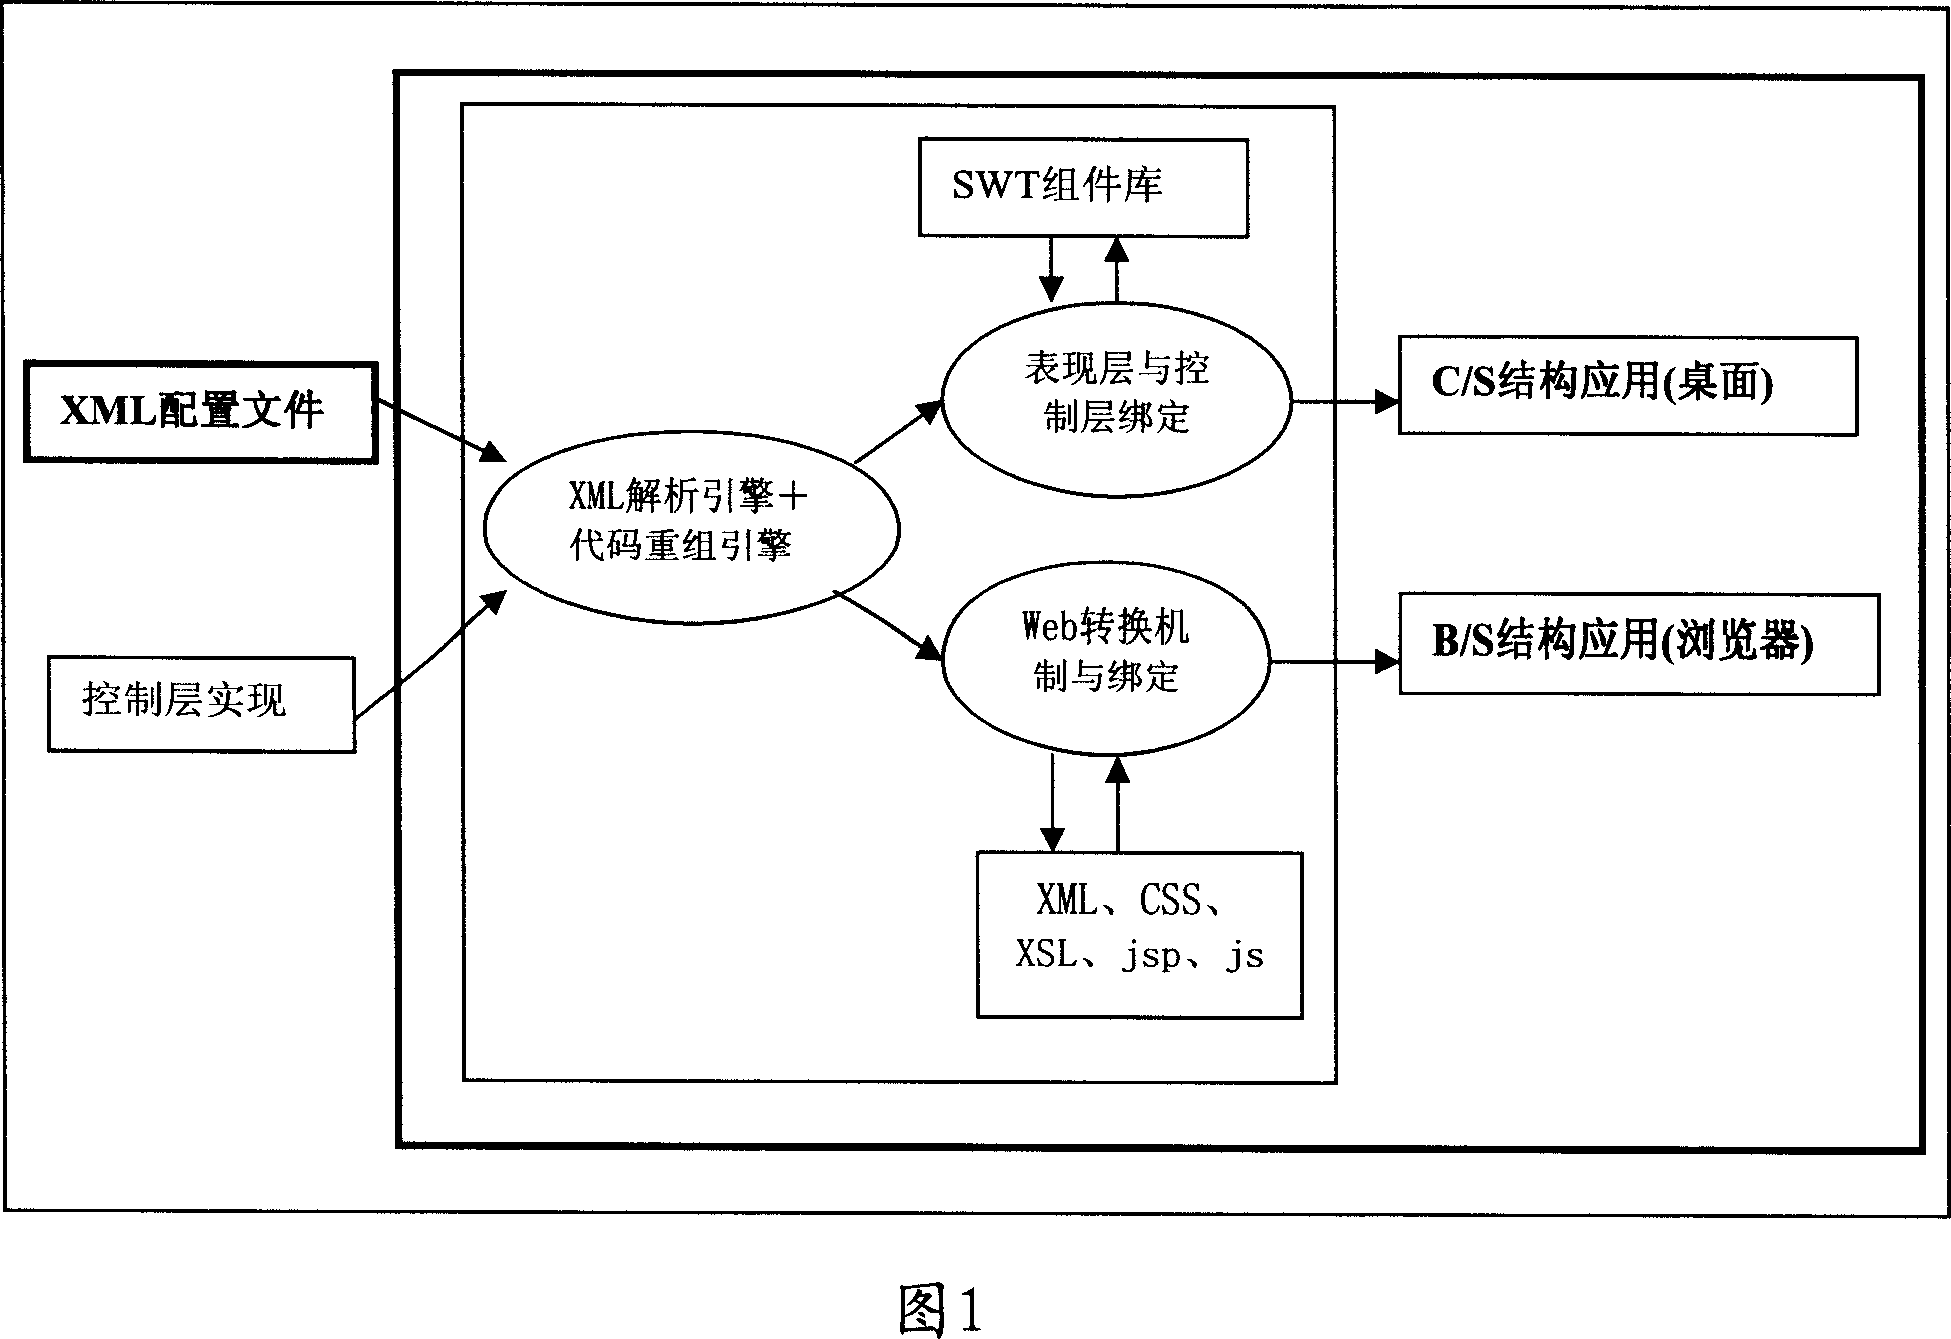 Method for generating two set of network administration systems